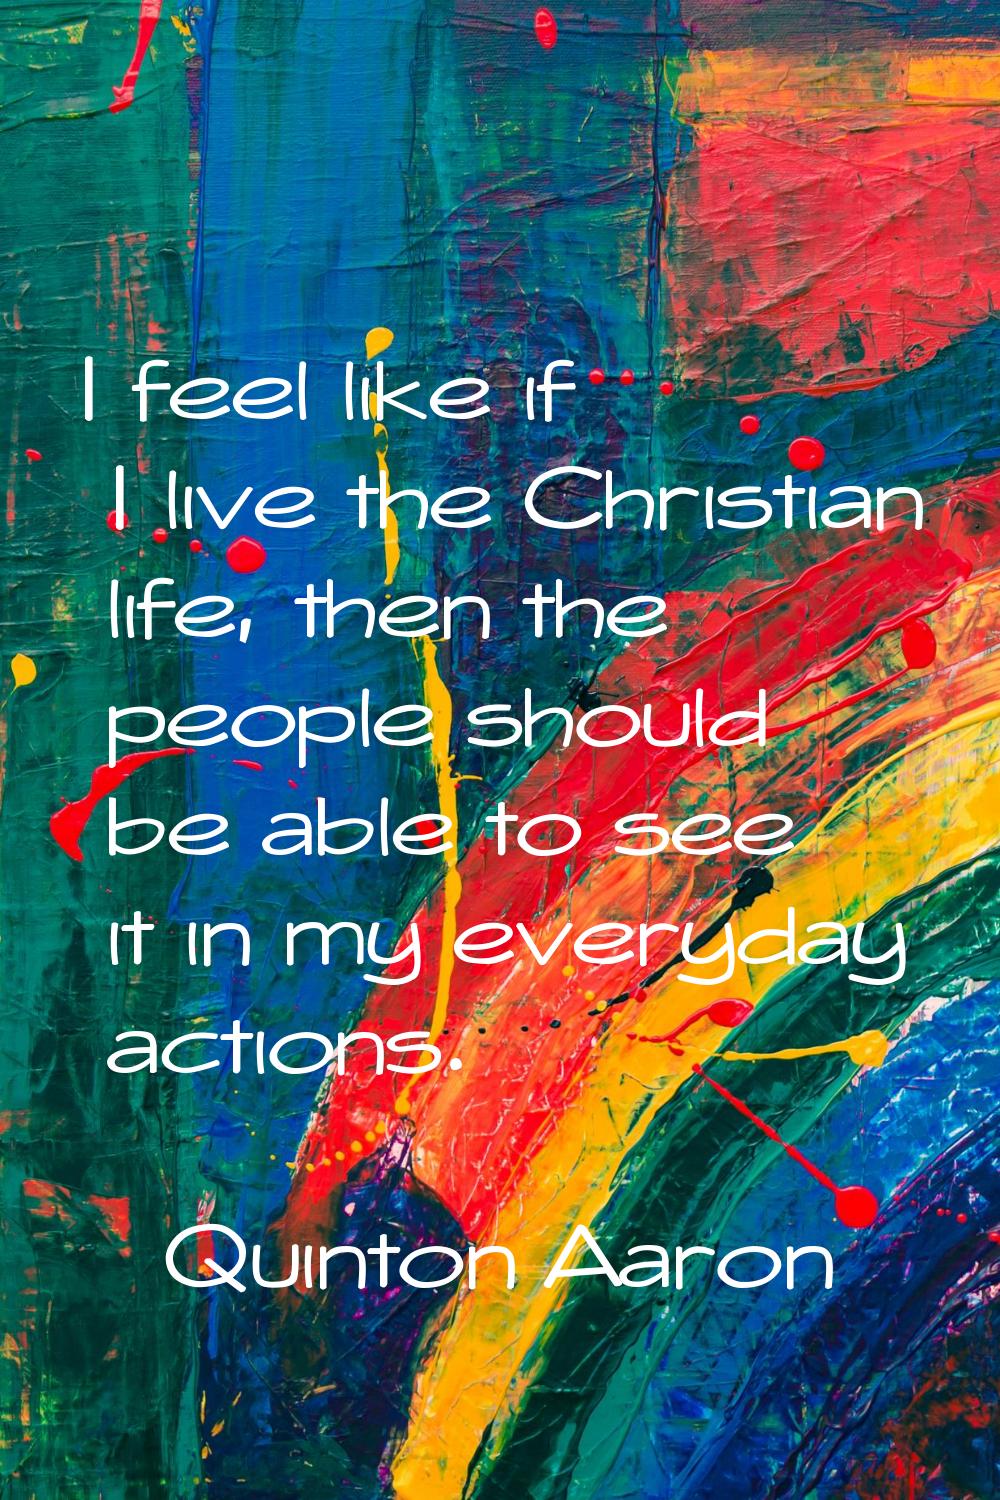 I feel like if I live the Christian life, then the people should be able to see it in my everyday a